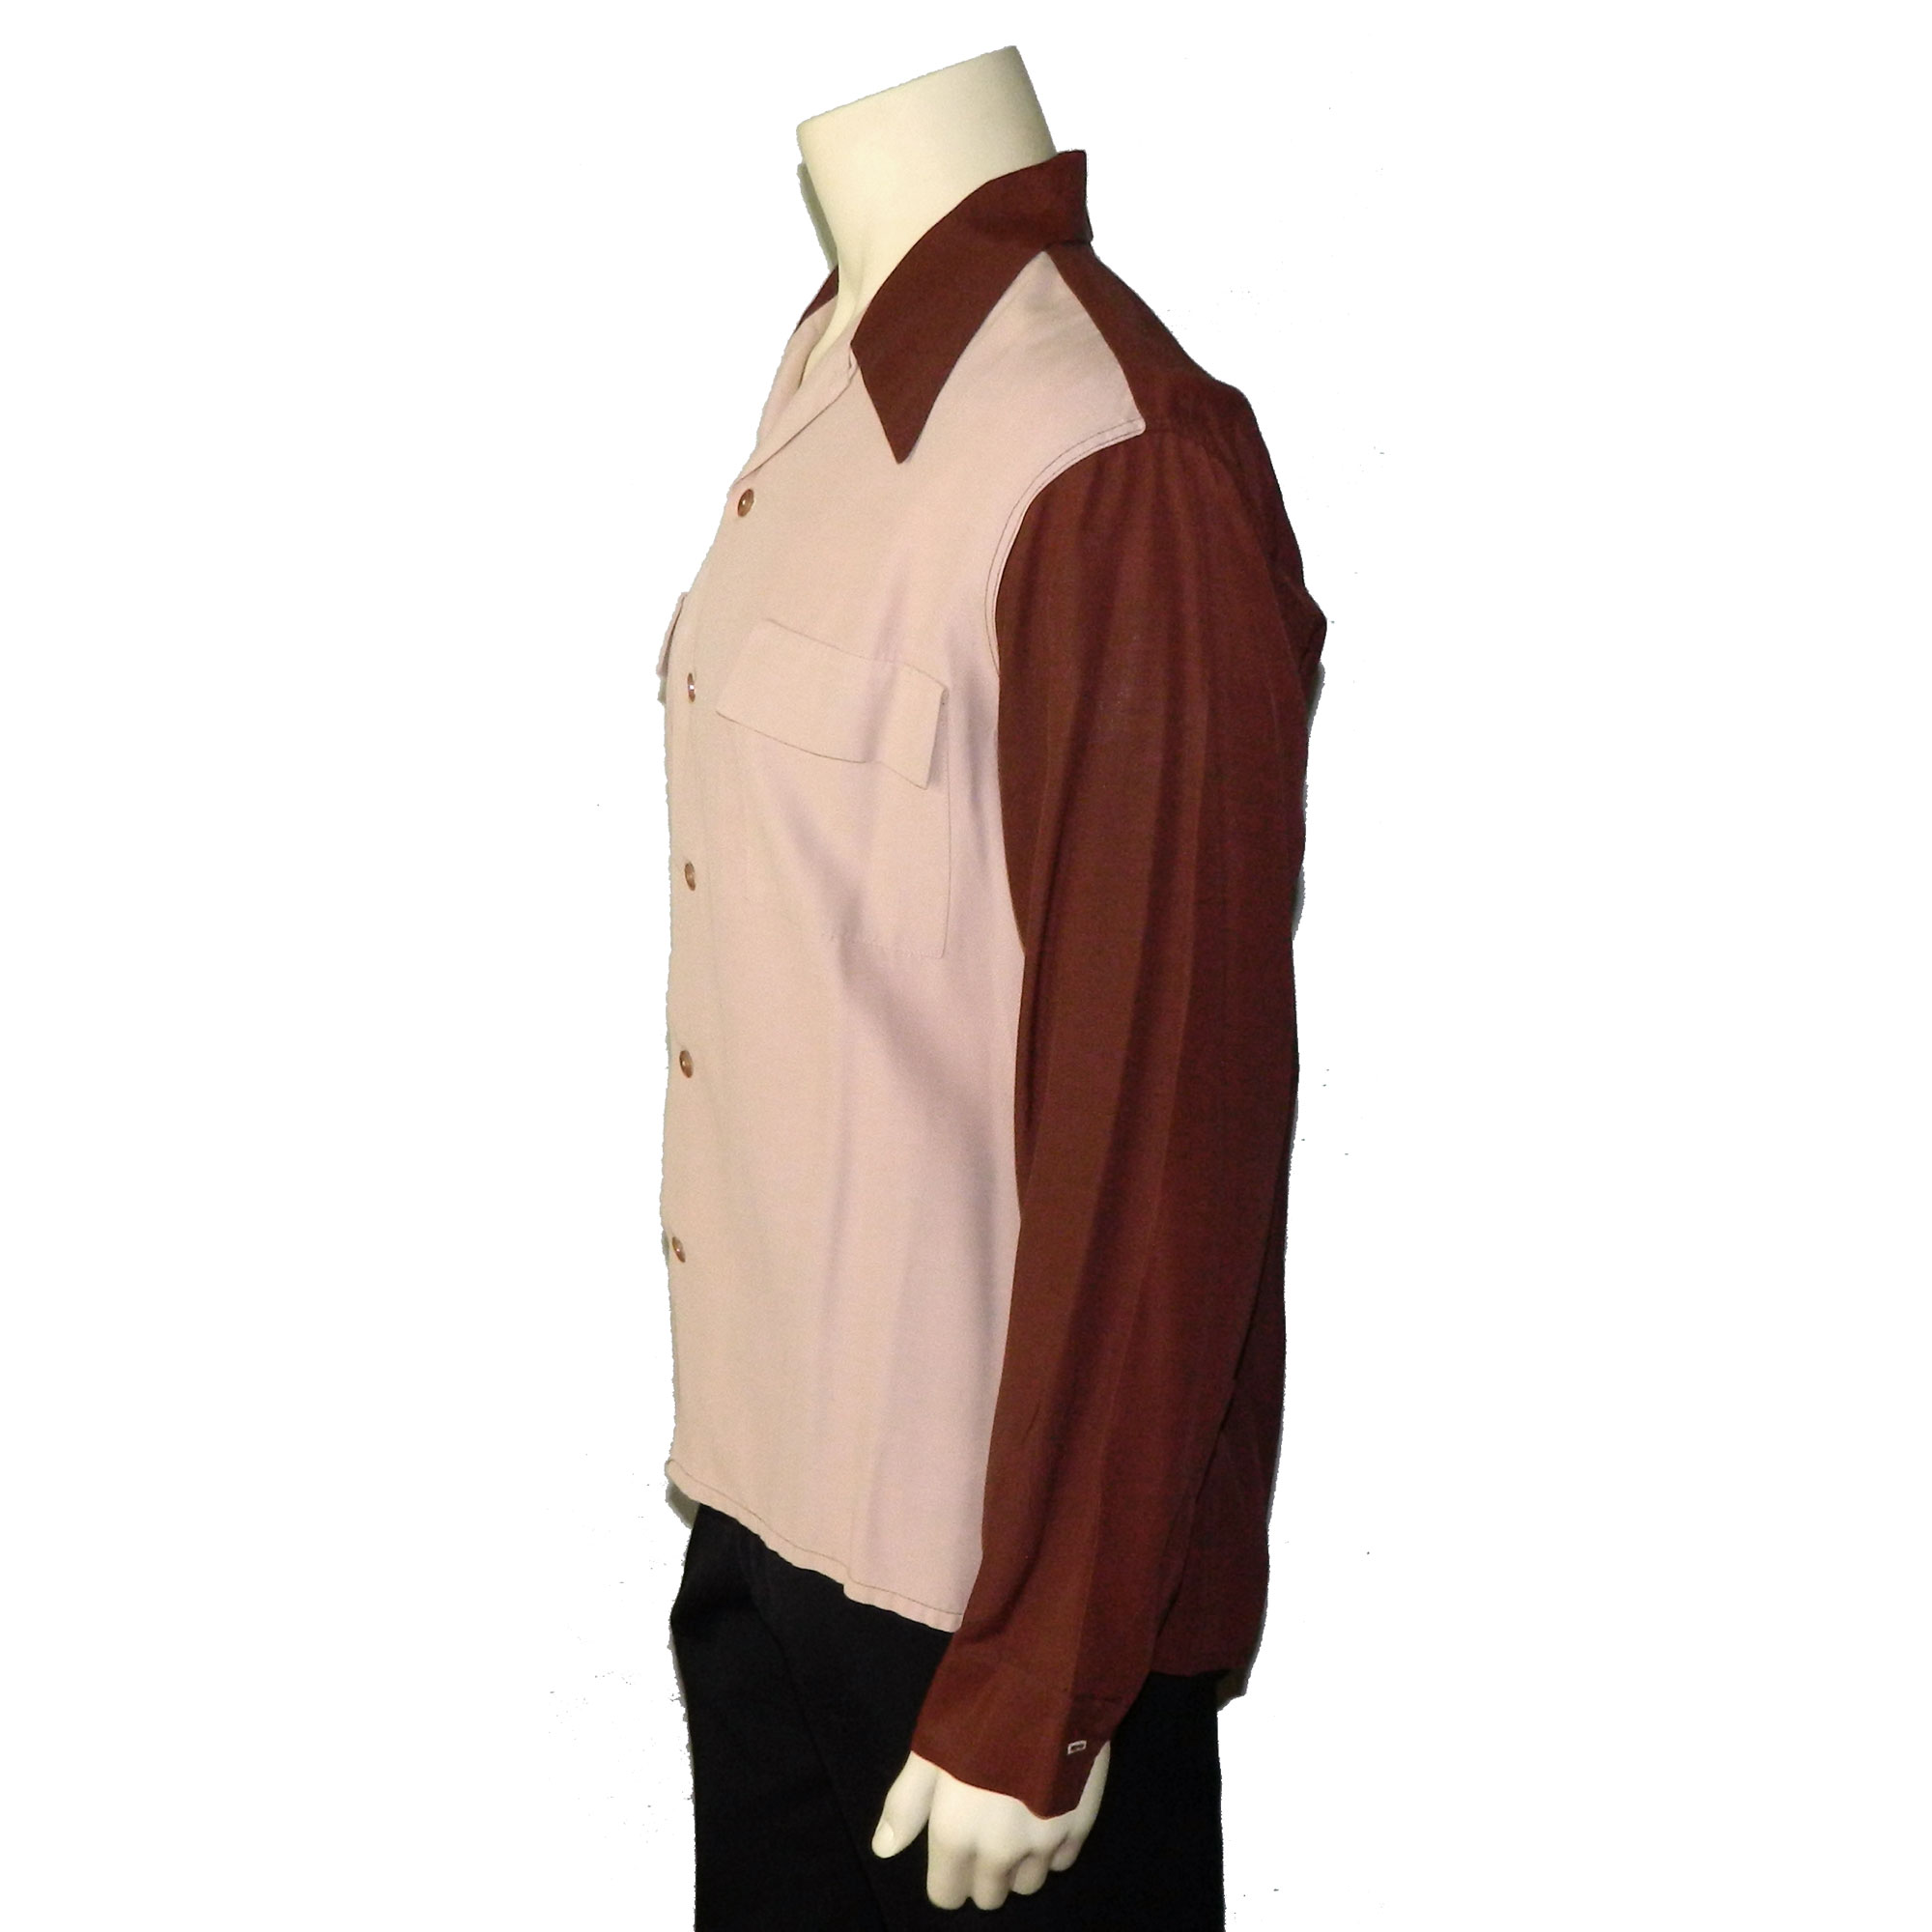 1940s panel front shirt